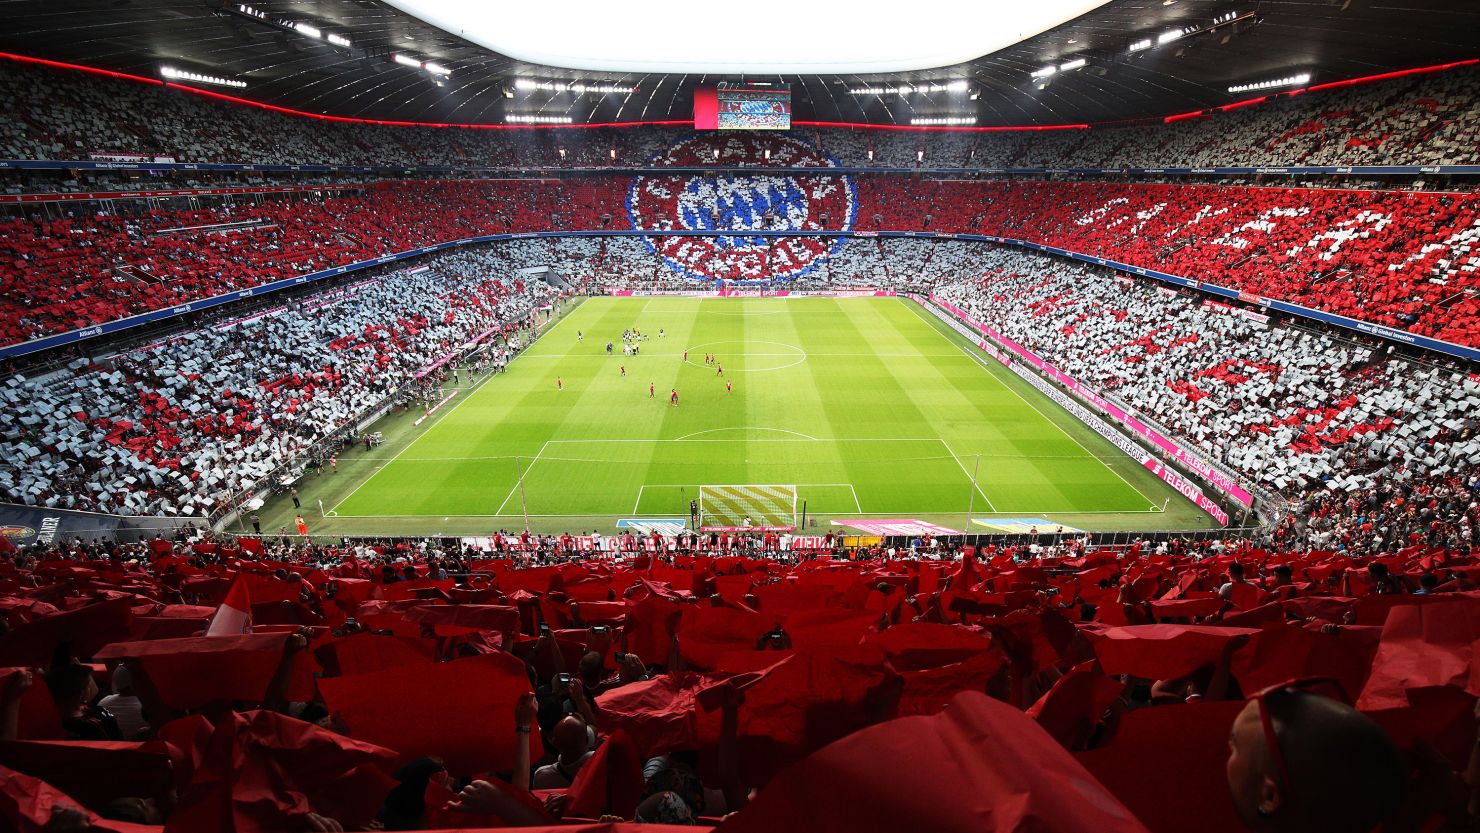 A general view of Allianz Arena before the Bayern Munich vs. Manchester United match on August 5, 2018 in Munich, Germany.